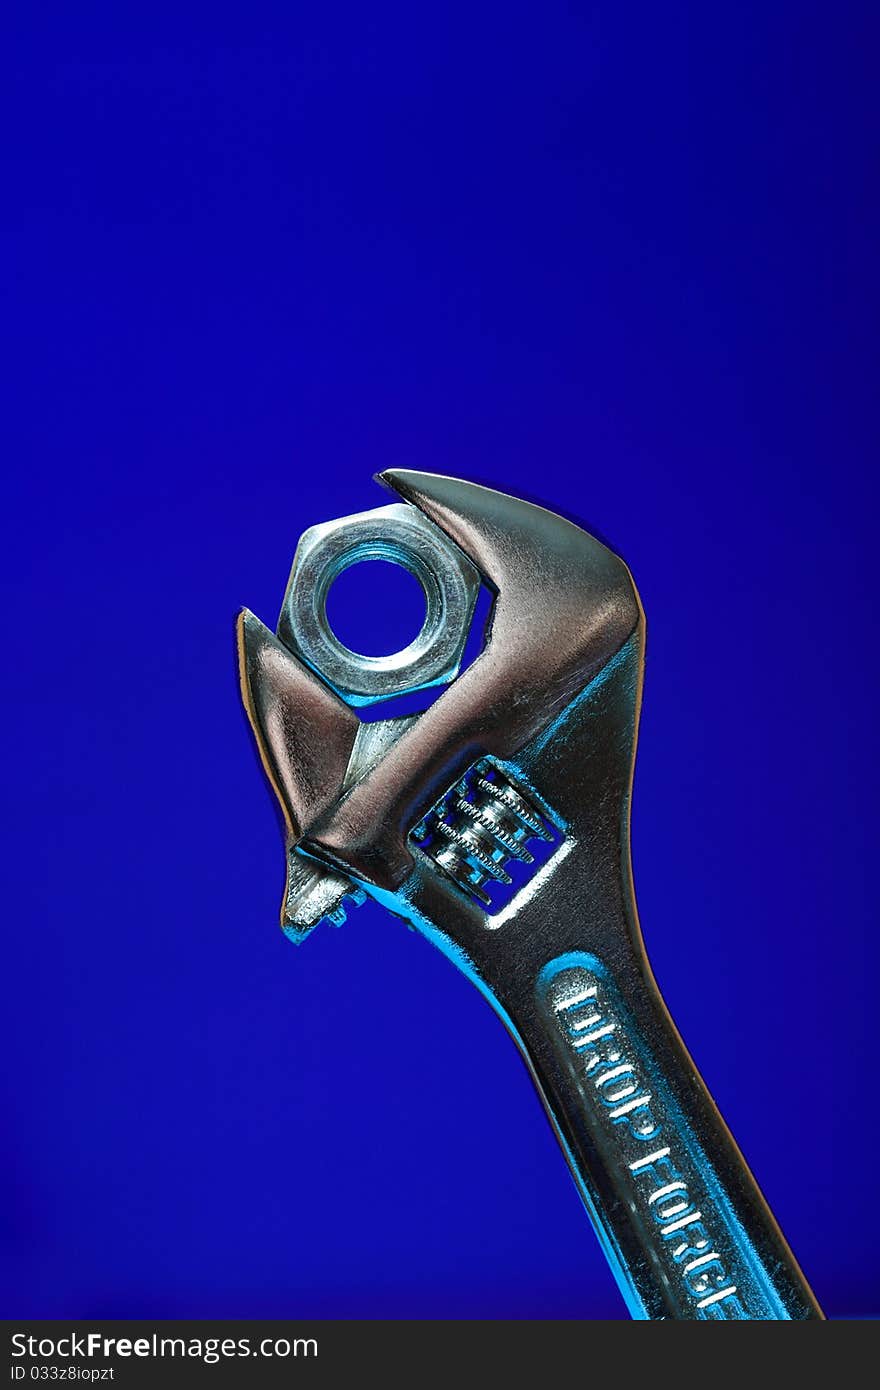 Extreme closeup of adjustable wrench gripping a nut on blue background. Extreme closeup of adjustable wrench gripping a nut on blue background